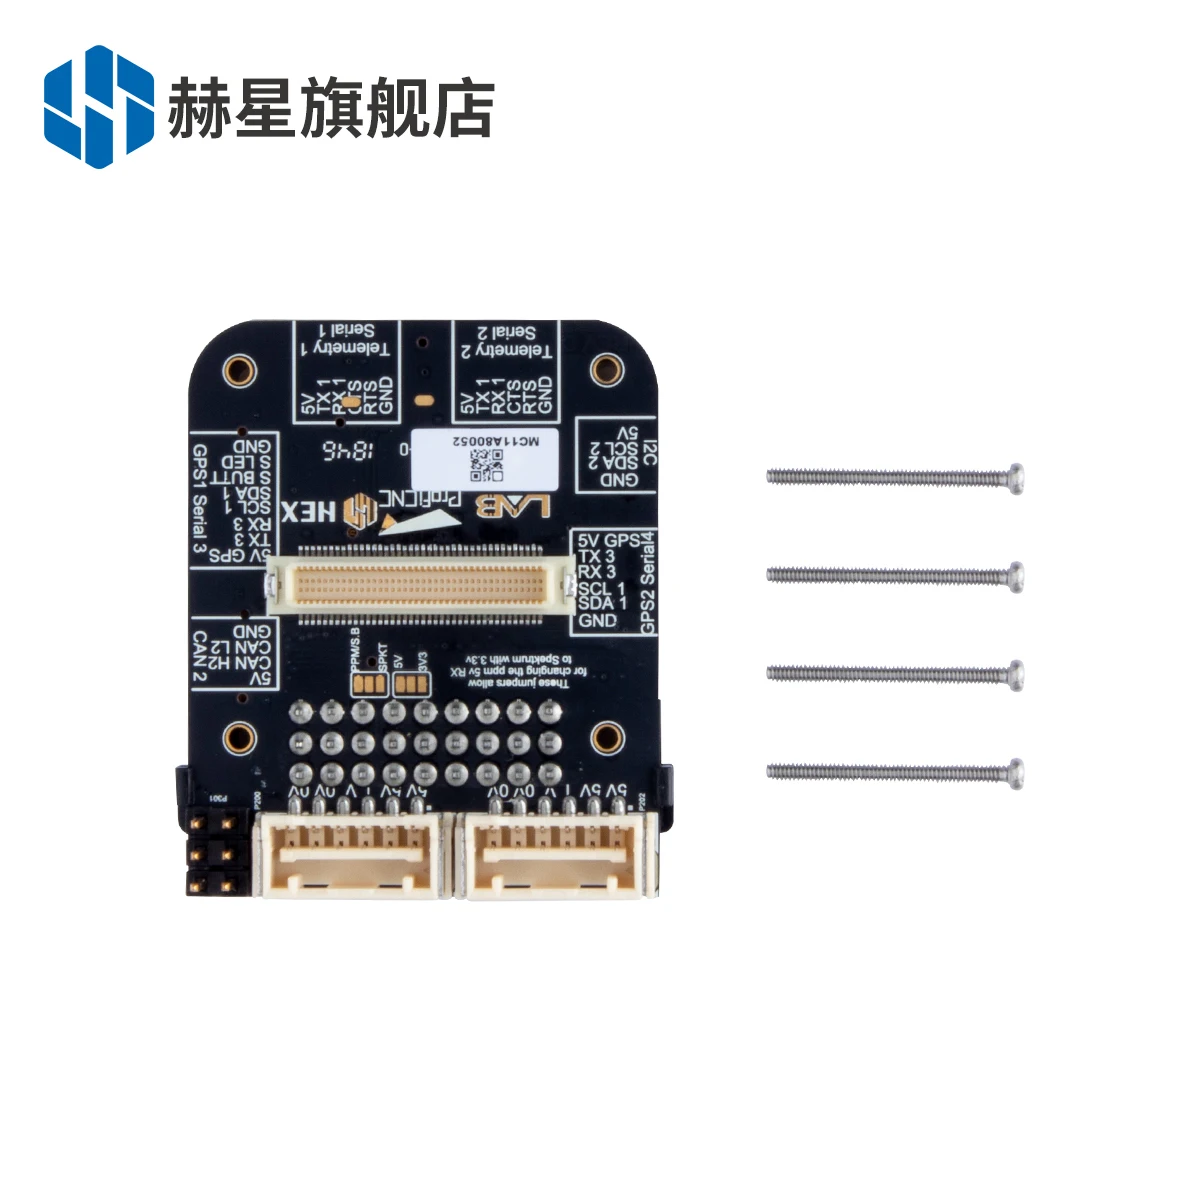 

HEX Hexing Pixhawk Mini Mini Carrier Board Adapted to Cube Main Control Module Unmanned Vehicle Flight Control Carrier Board